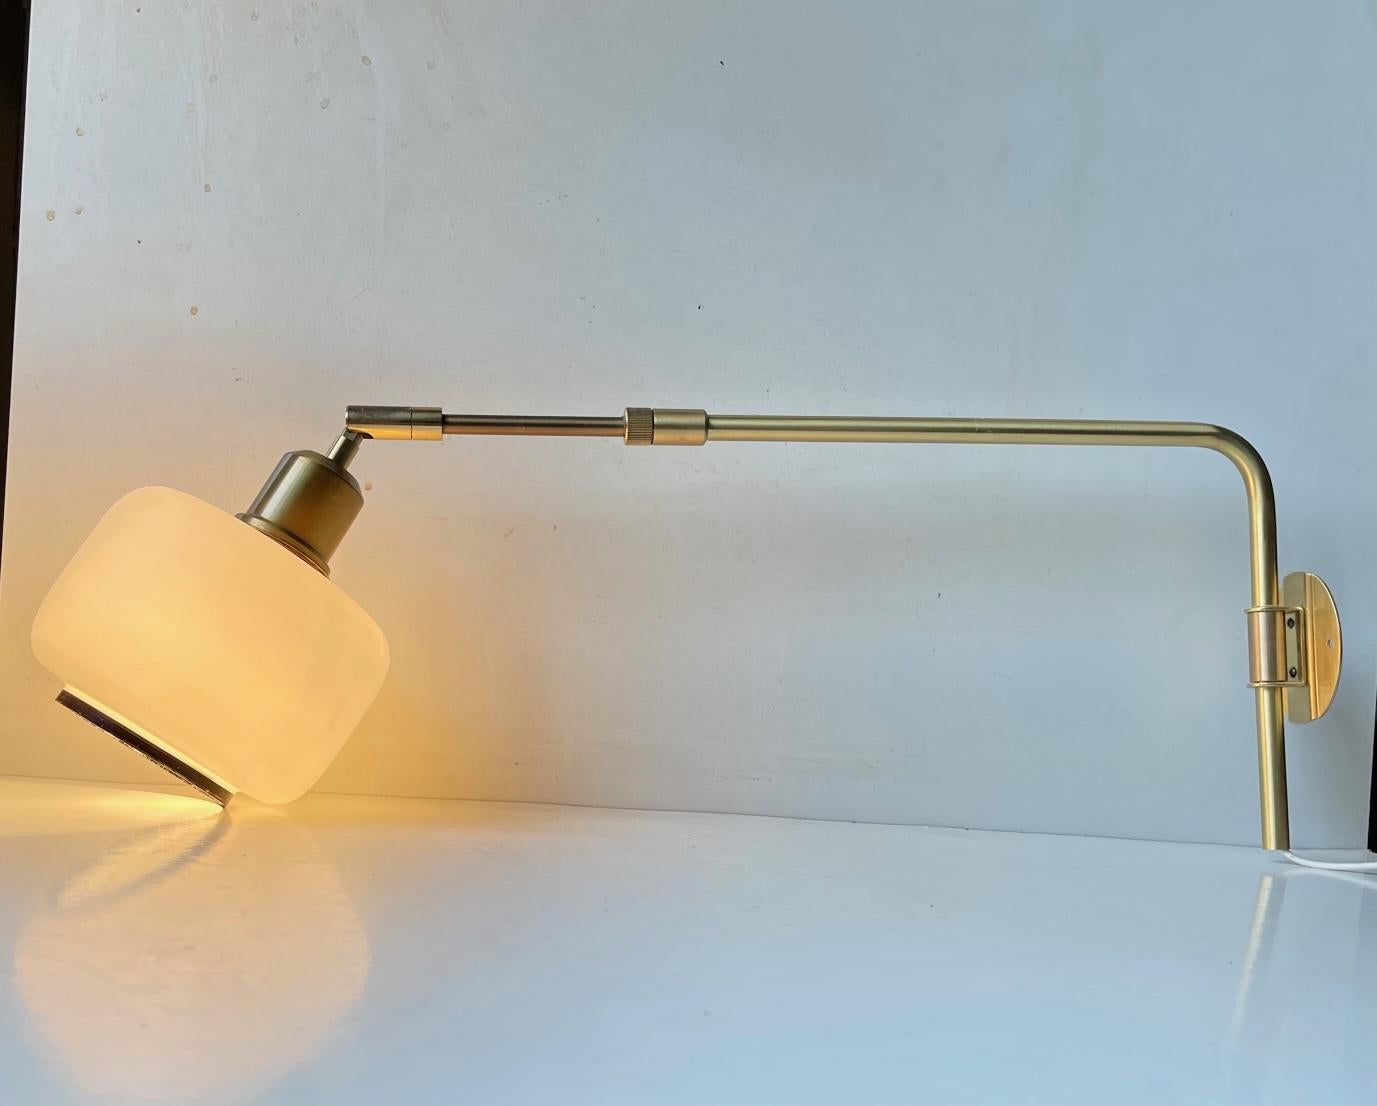 This fully adjustable telescopic wall swing light has a mechanism that allows you to adjust its reach from 45 to 78 cm from the wall. The residue of its old paper makers mark indicates that it was made by either Lyskær or Lyfa. during the 1970s or